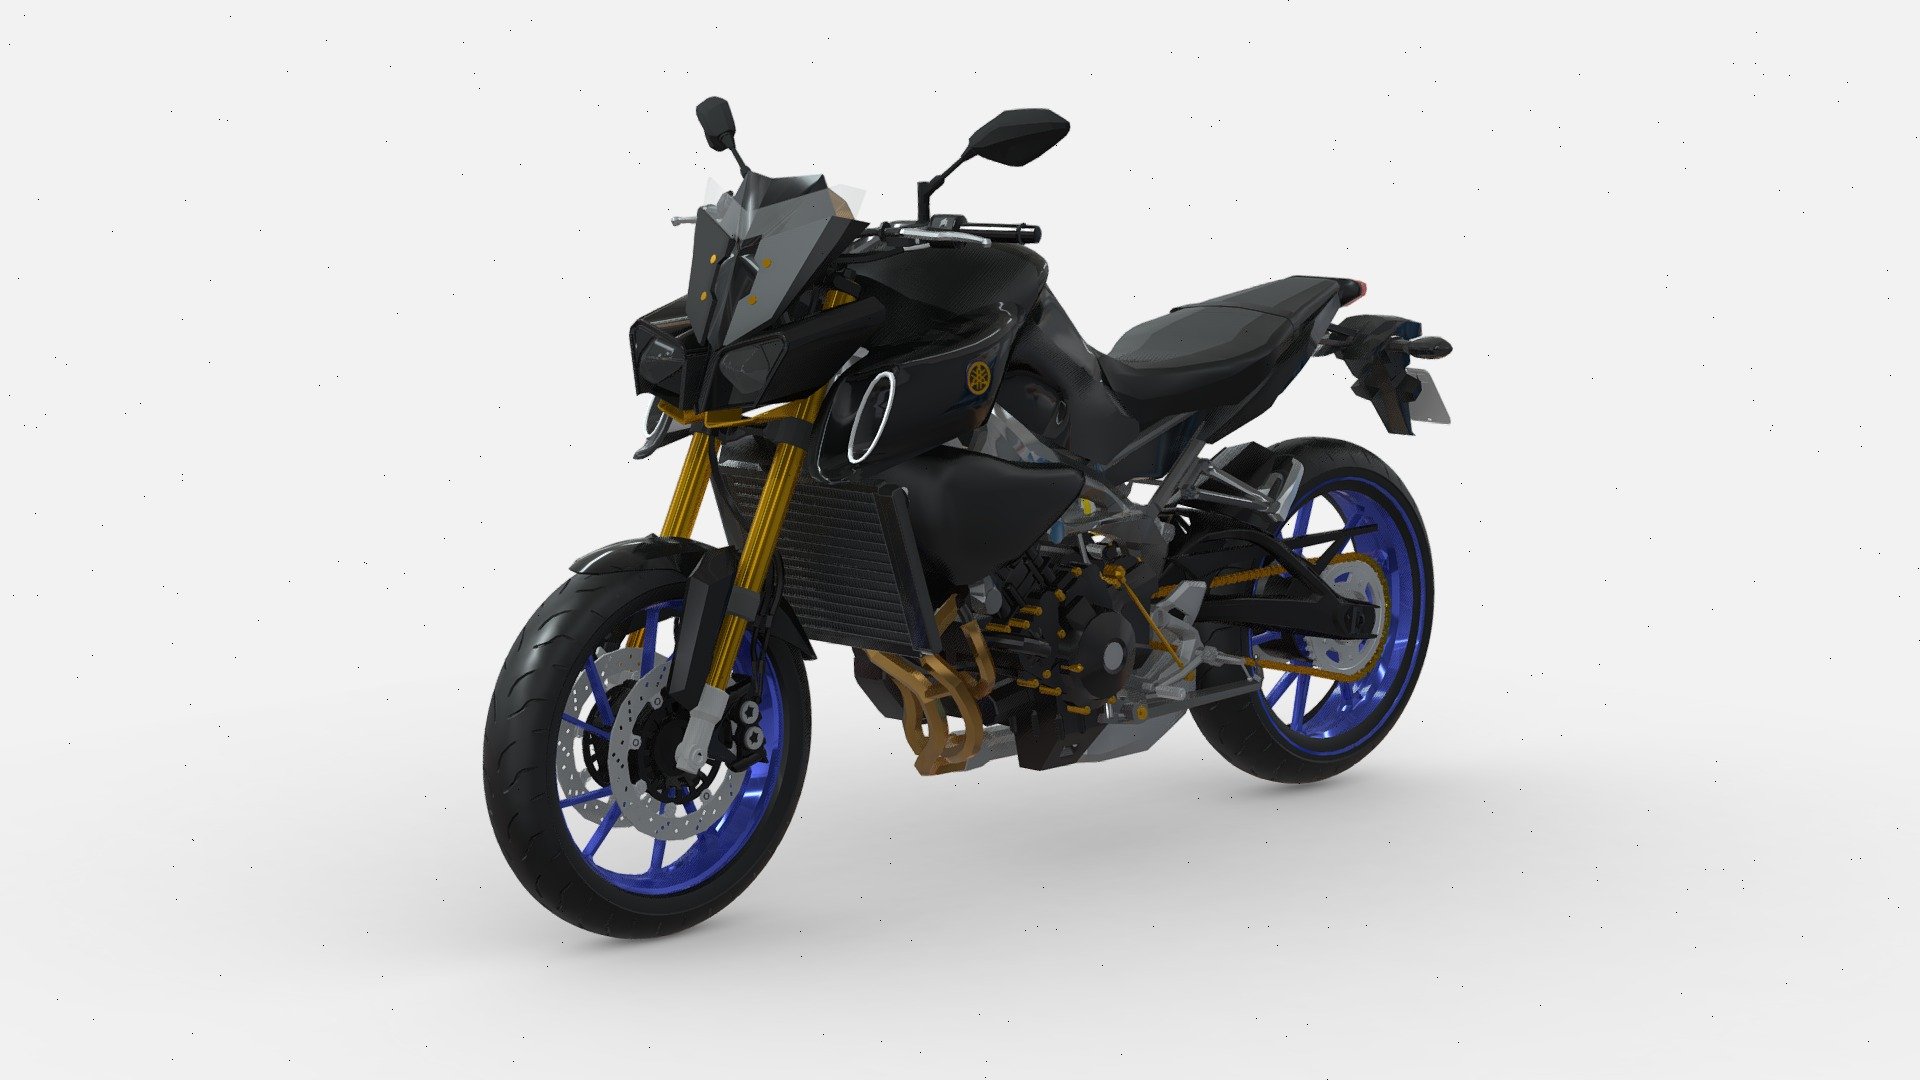 This is an exact 3D replica of the YAMAHA MT-10 motorcycle. This model includes details such as the engine, tires, shock absorbers and other elements. This is an ideal model to use in visualizations, animations or computer graphics projects.

Customer reviews are extremely important for the development and improvement of services. If you purchased a 3D model in my store, I encourage you to share your opinion by leaving a rating (stars). This will help me understand your expectations and adapt
 offer to suit your needs. Thank you for your time and support!

see all collection: https://skfb.ly/oOt6w - 3D model YAMAHA MT 10 - Buy Royalty Free 3D model by zizian 3d model